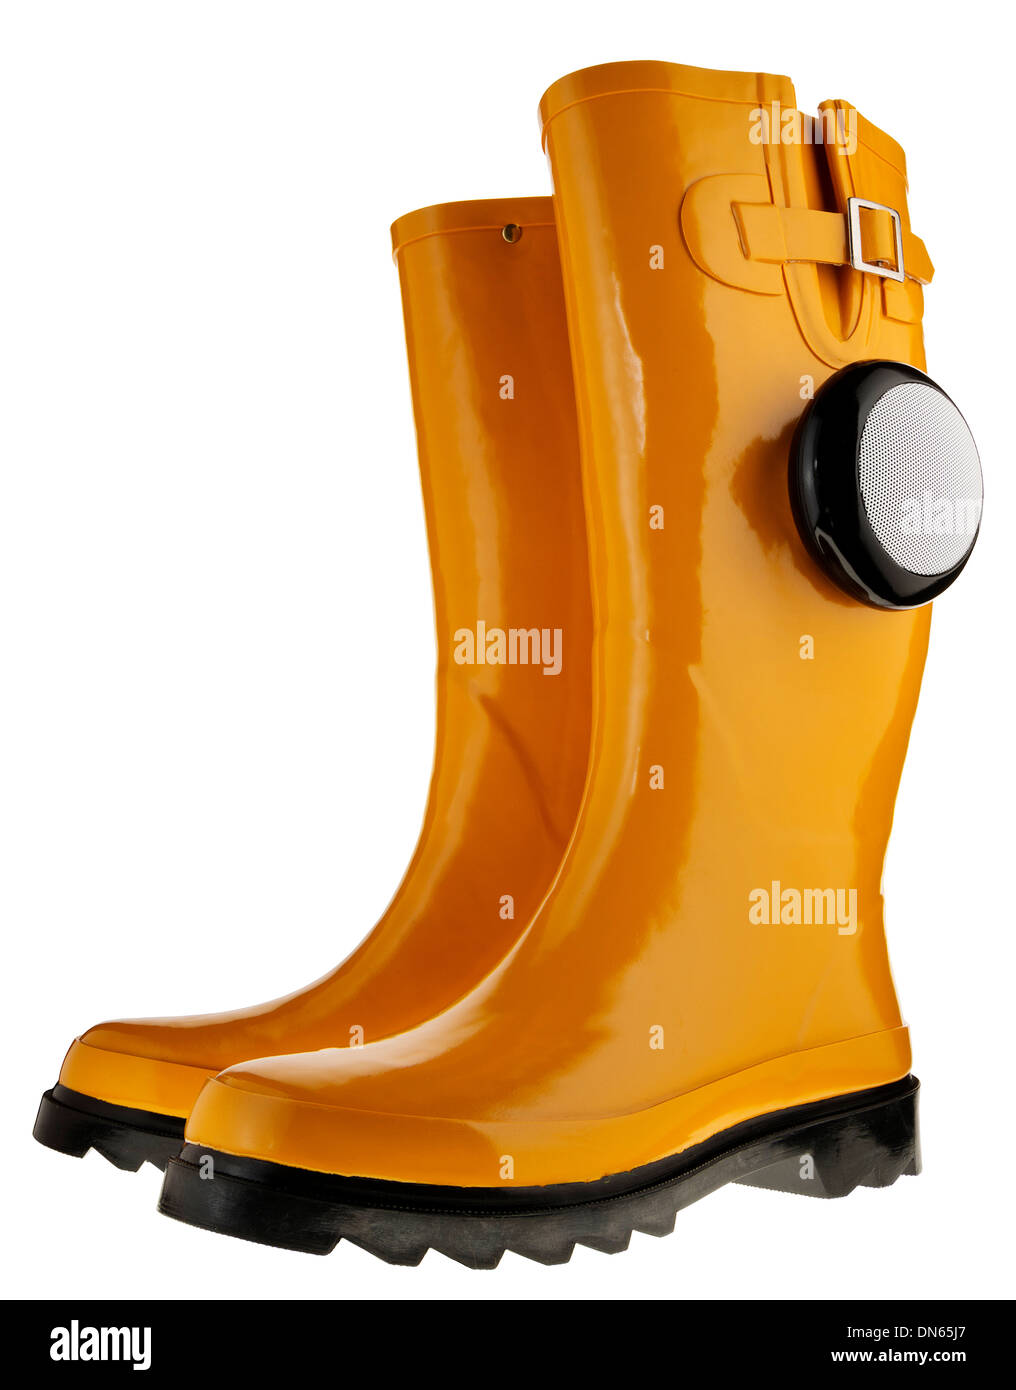 Yellow Wellington boots with bluetooth speaker attached Stock Photo - Alamy